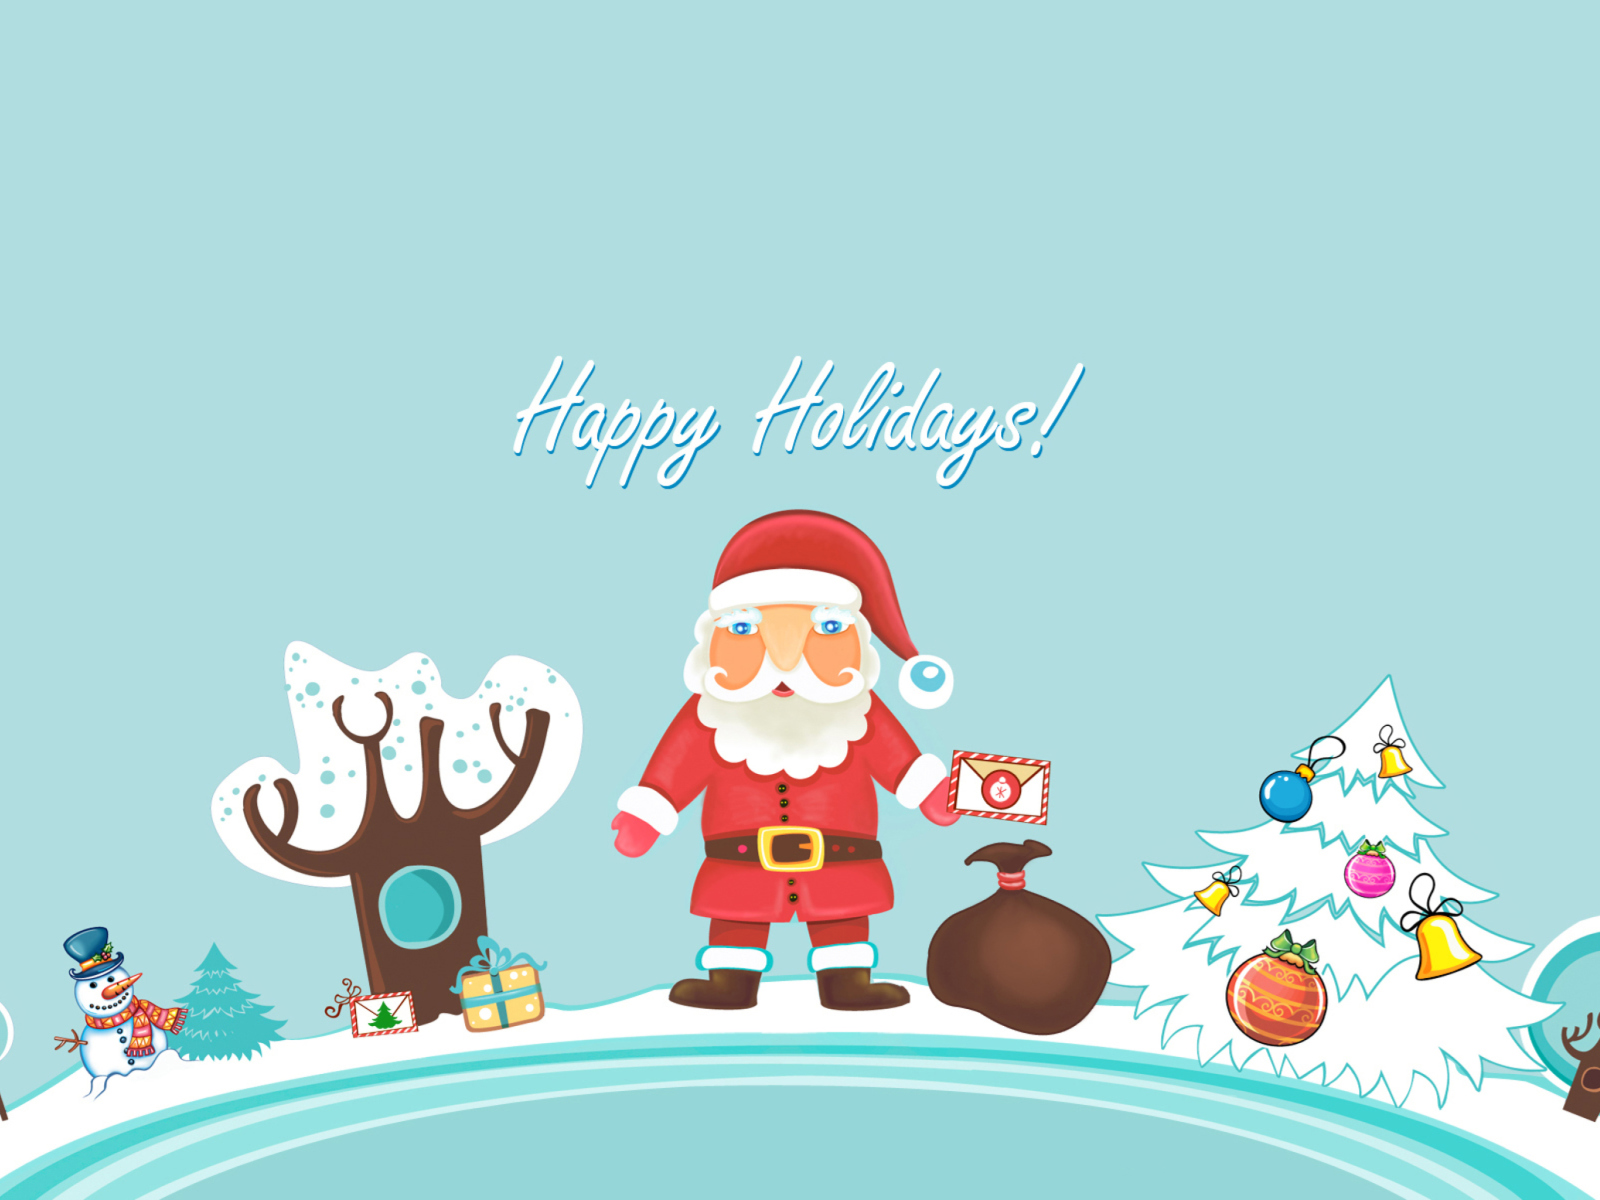 Santa Claus Wishes You Happy Holidays wallpaper 1600x1200